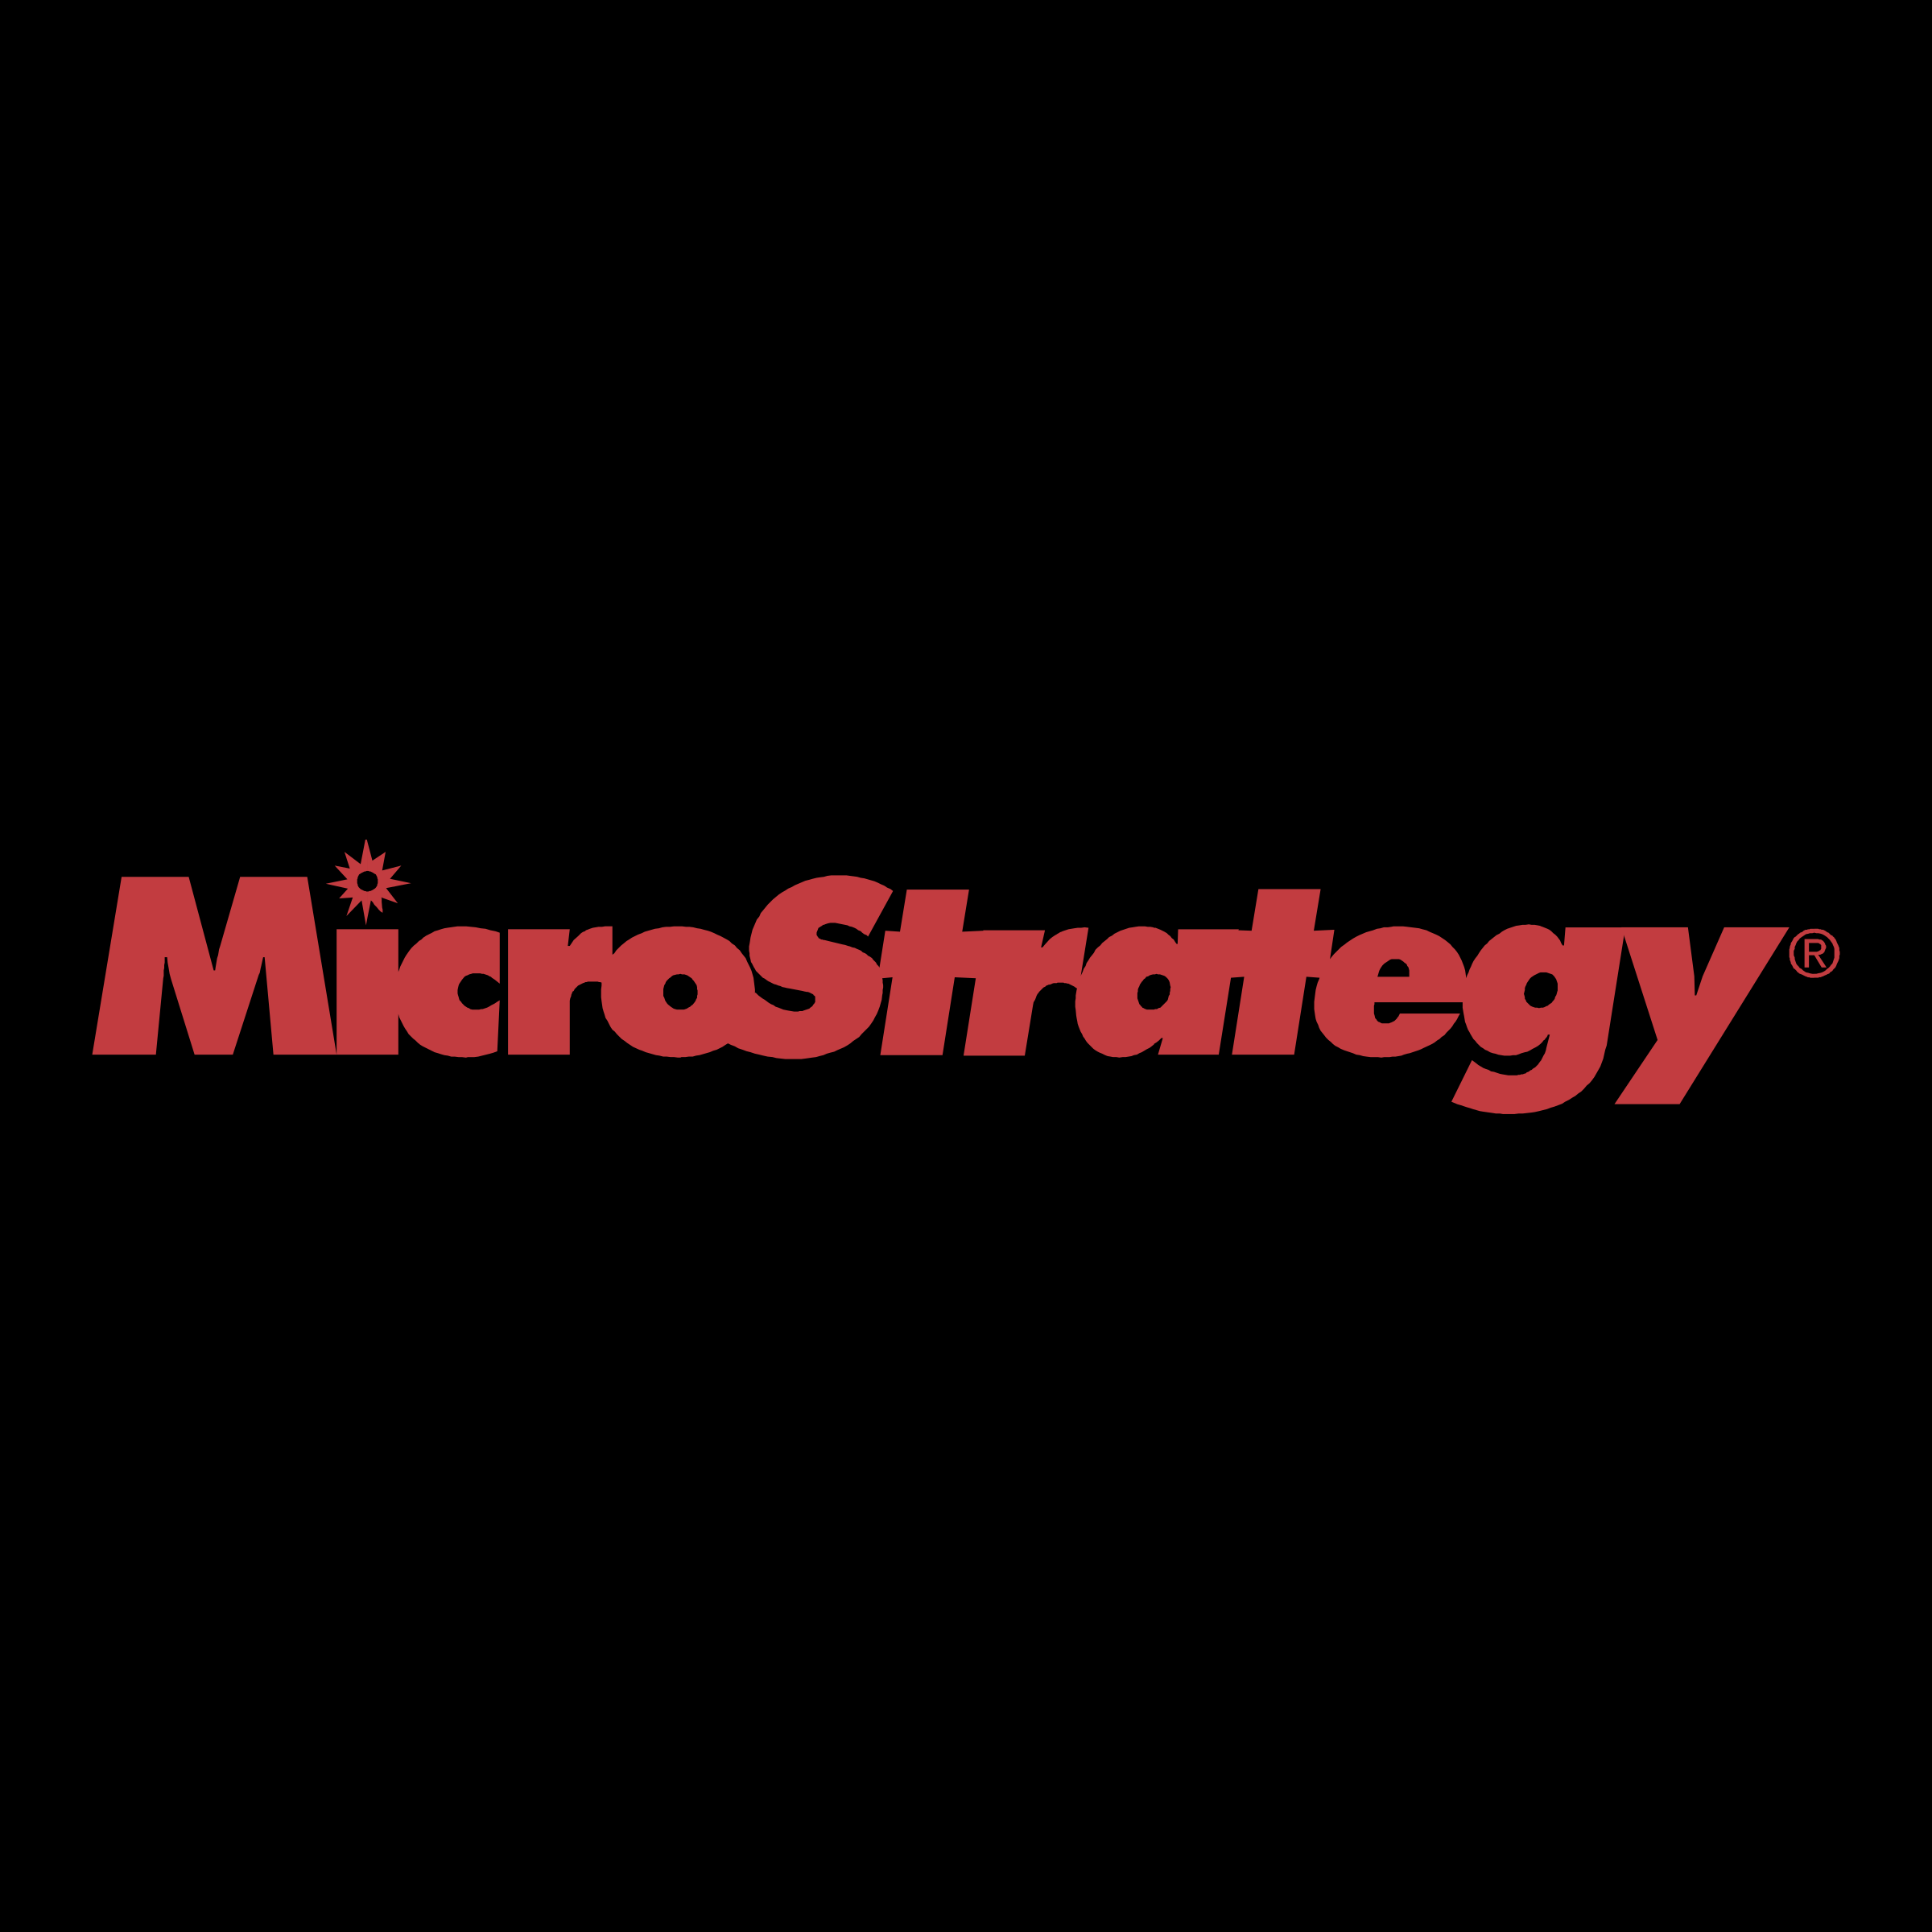 MicroStrategy Logo - MicroStrategy Logo PNG Transparent & SVG Vector - Freebie Supply